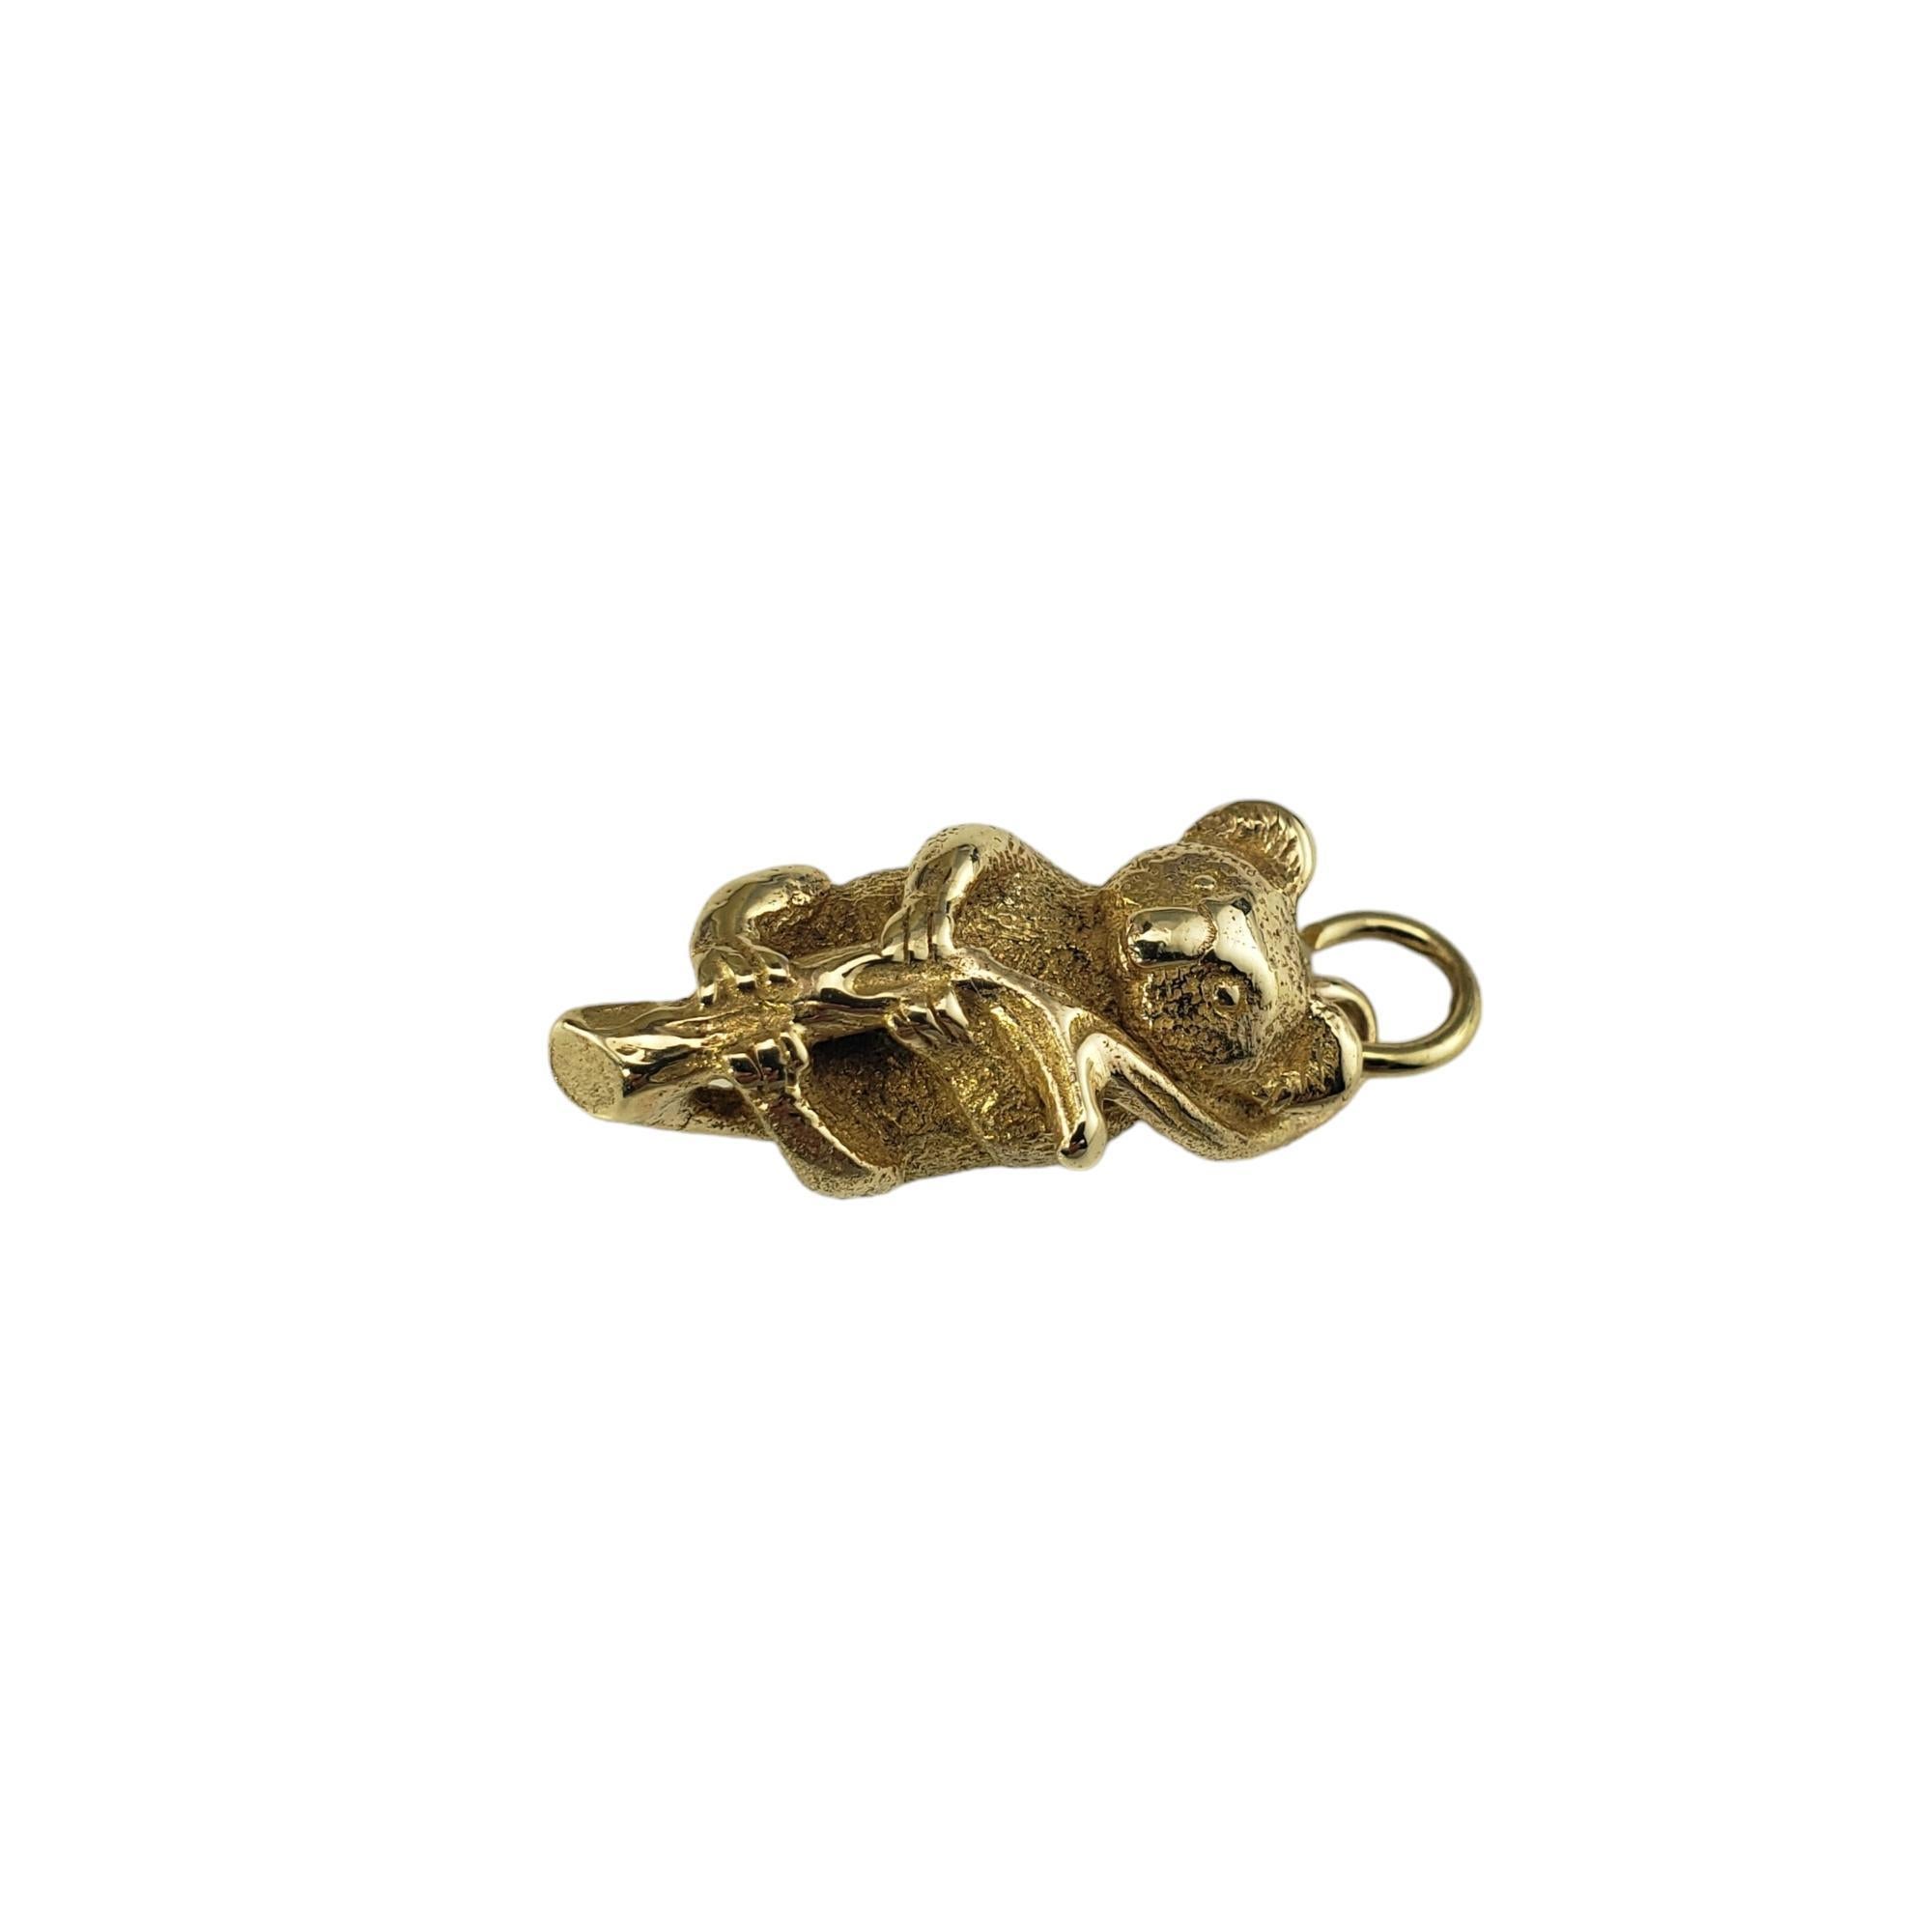 9 Karat Yellow Gold Koala Charm

This lovely 3D charm features an adorable koala bear crafted in meticulously detailed 9K yellow gold.

Size: 24 mm x 12 mm

Stamped: Reg. No. 38755  9 ct.

Weight: 6.7 dwt./ 10.4 gr.

Very good condition,